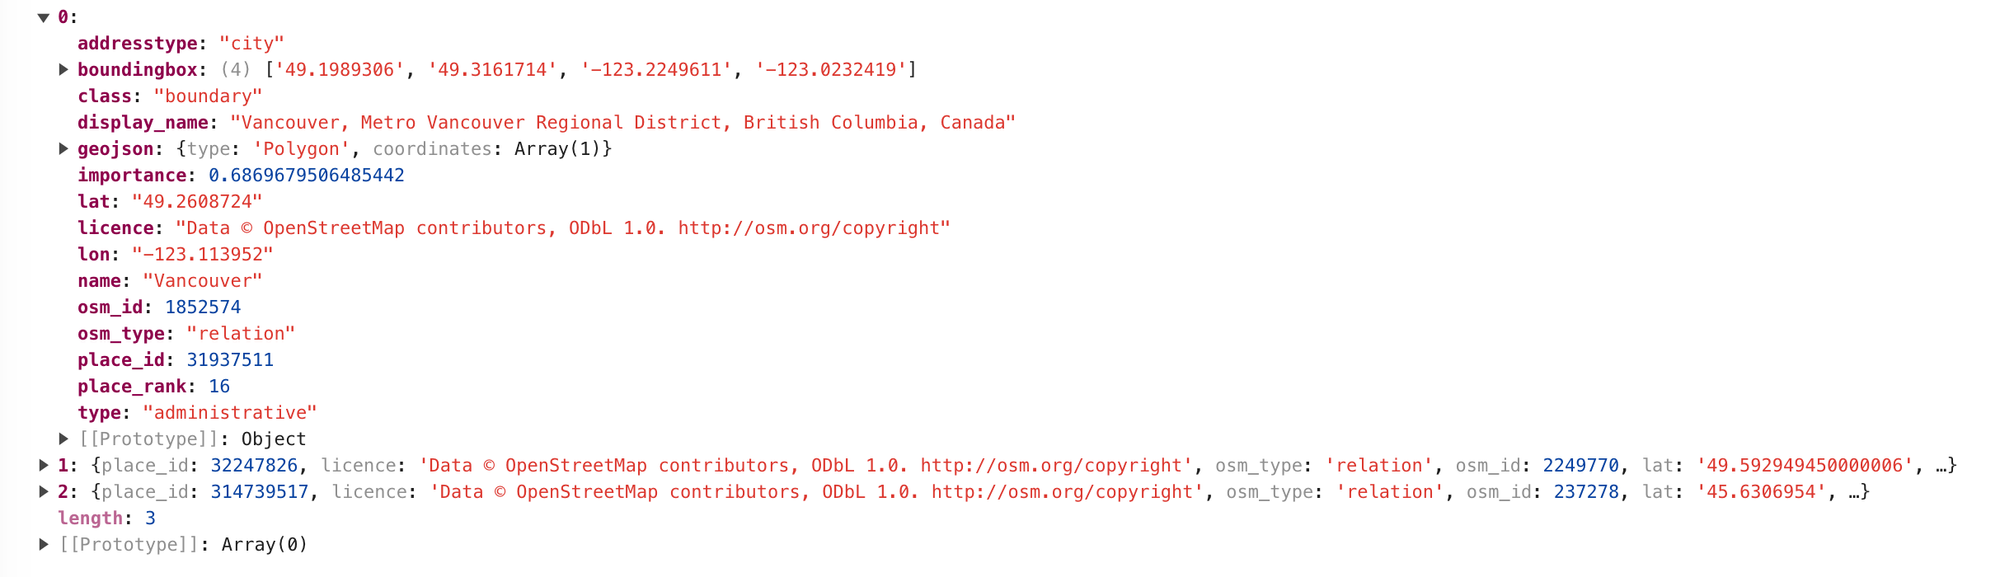 Response from the Nominatim API search endpoint for the text string "vancouver"